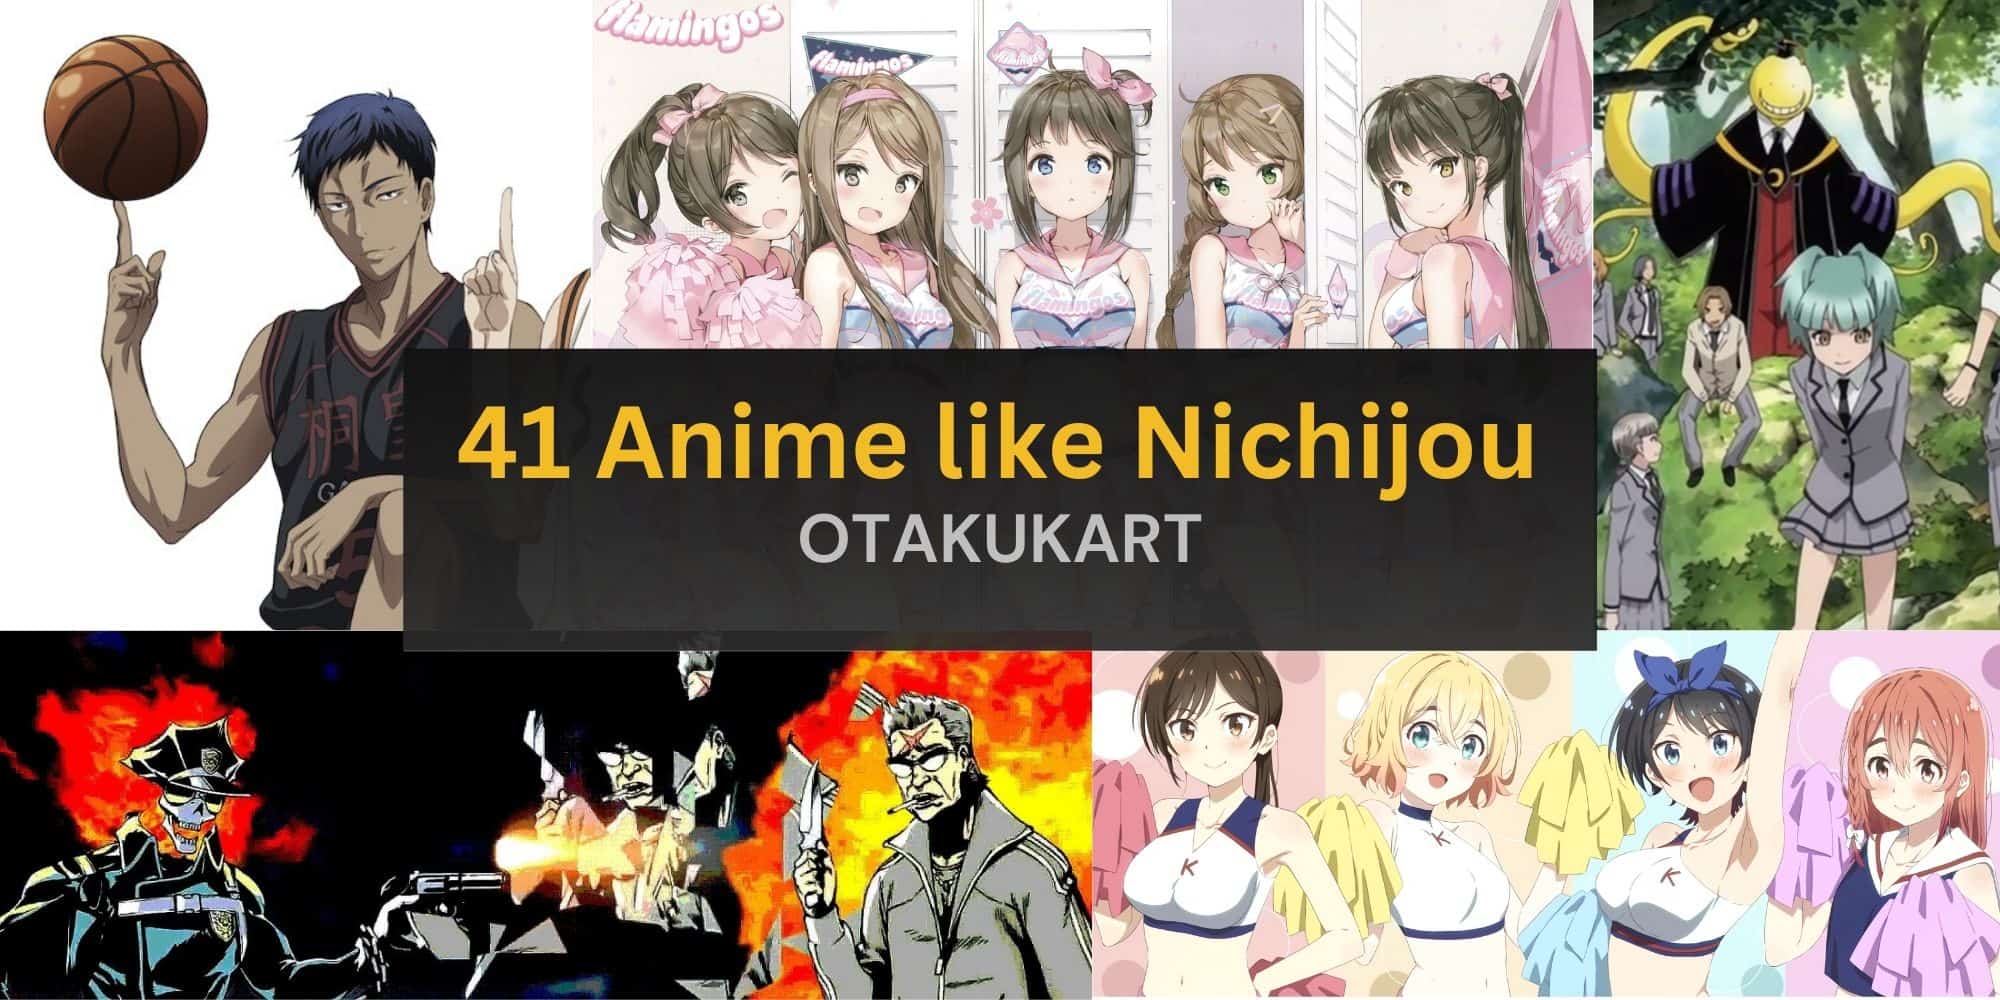 Are there any anime that are similar to Nichijou? - Quora